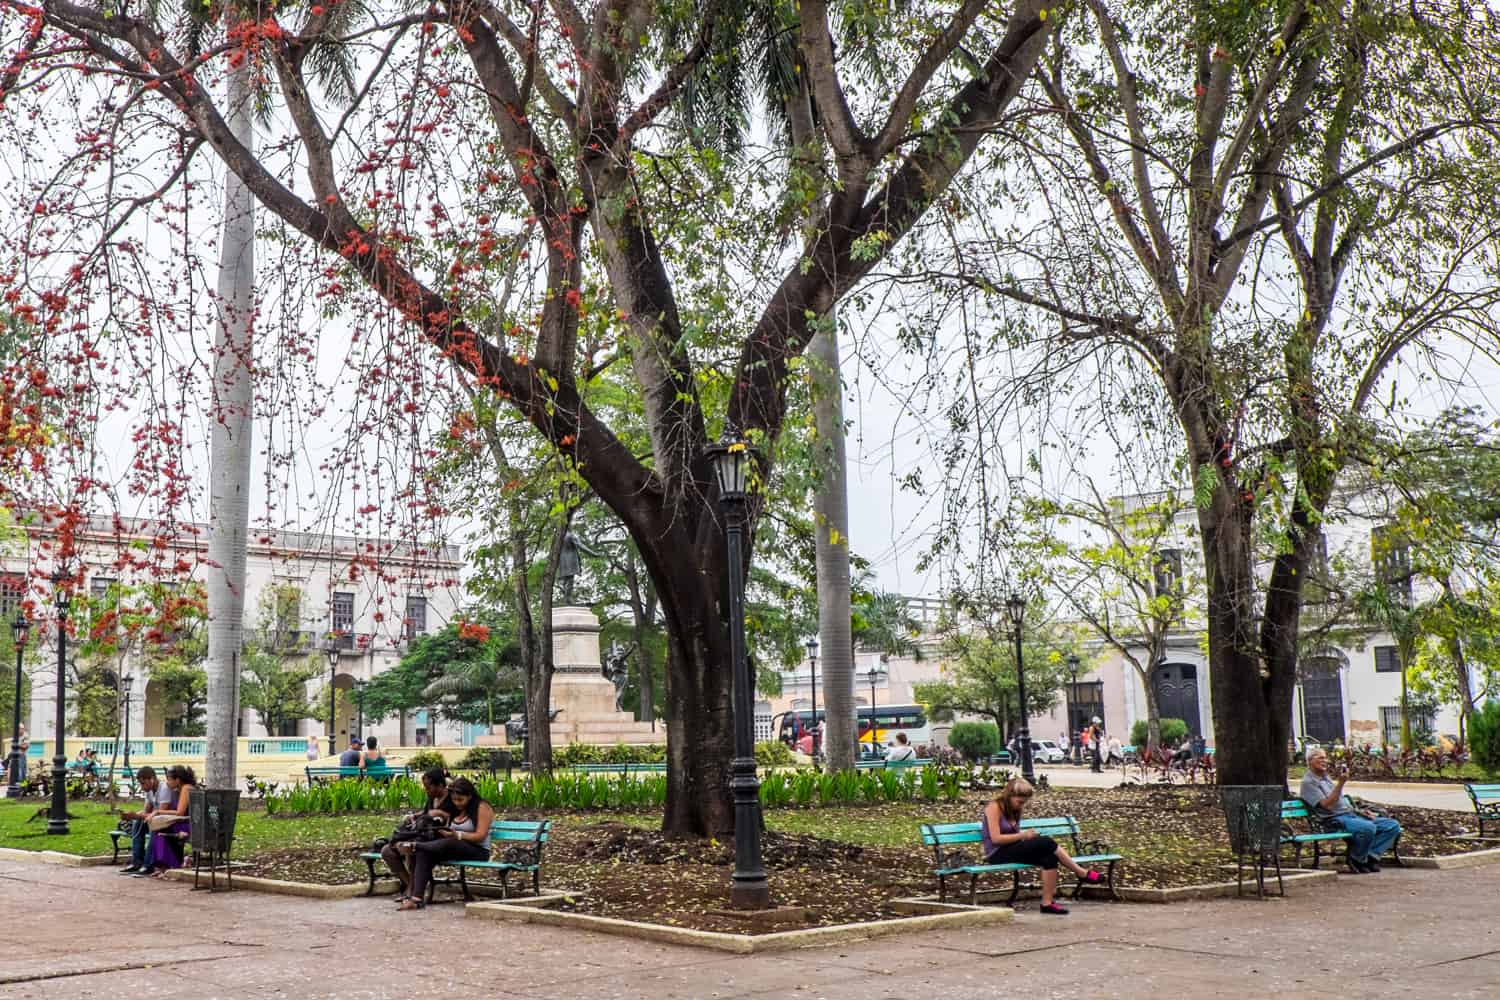 People in a park sitting at benches and looking at their phones - public squares are the only places to get Wifi in Cuba. 